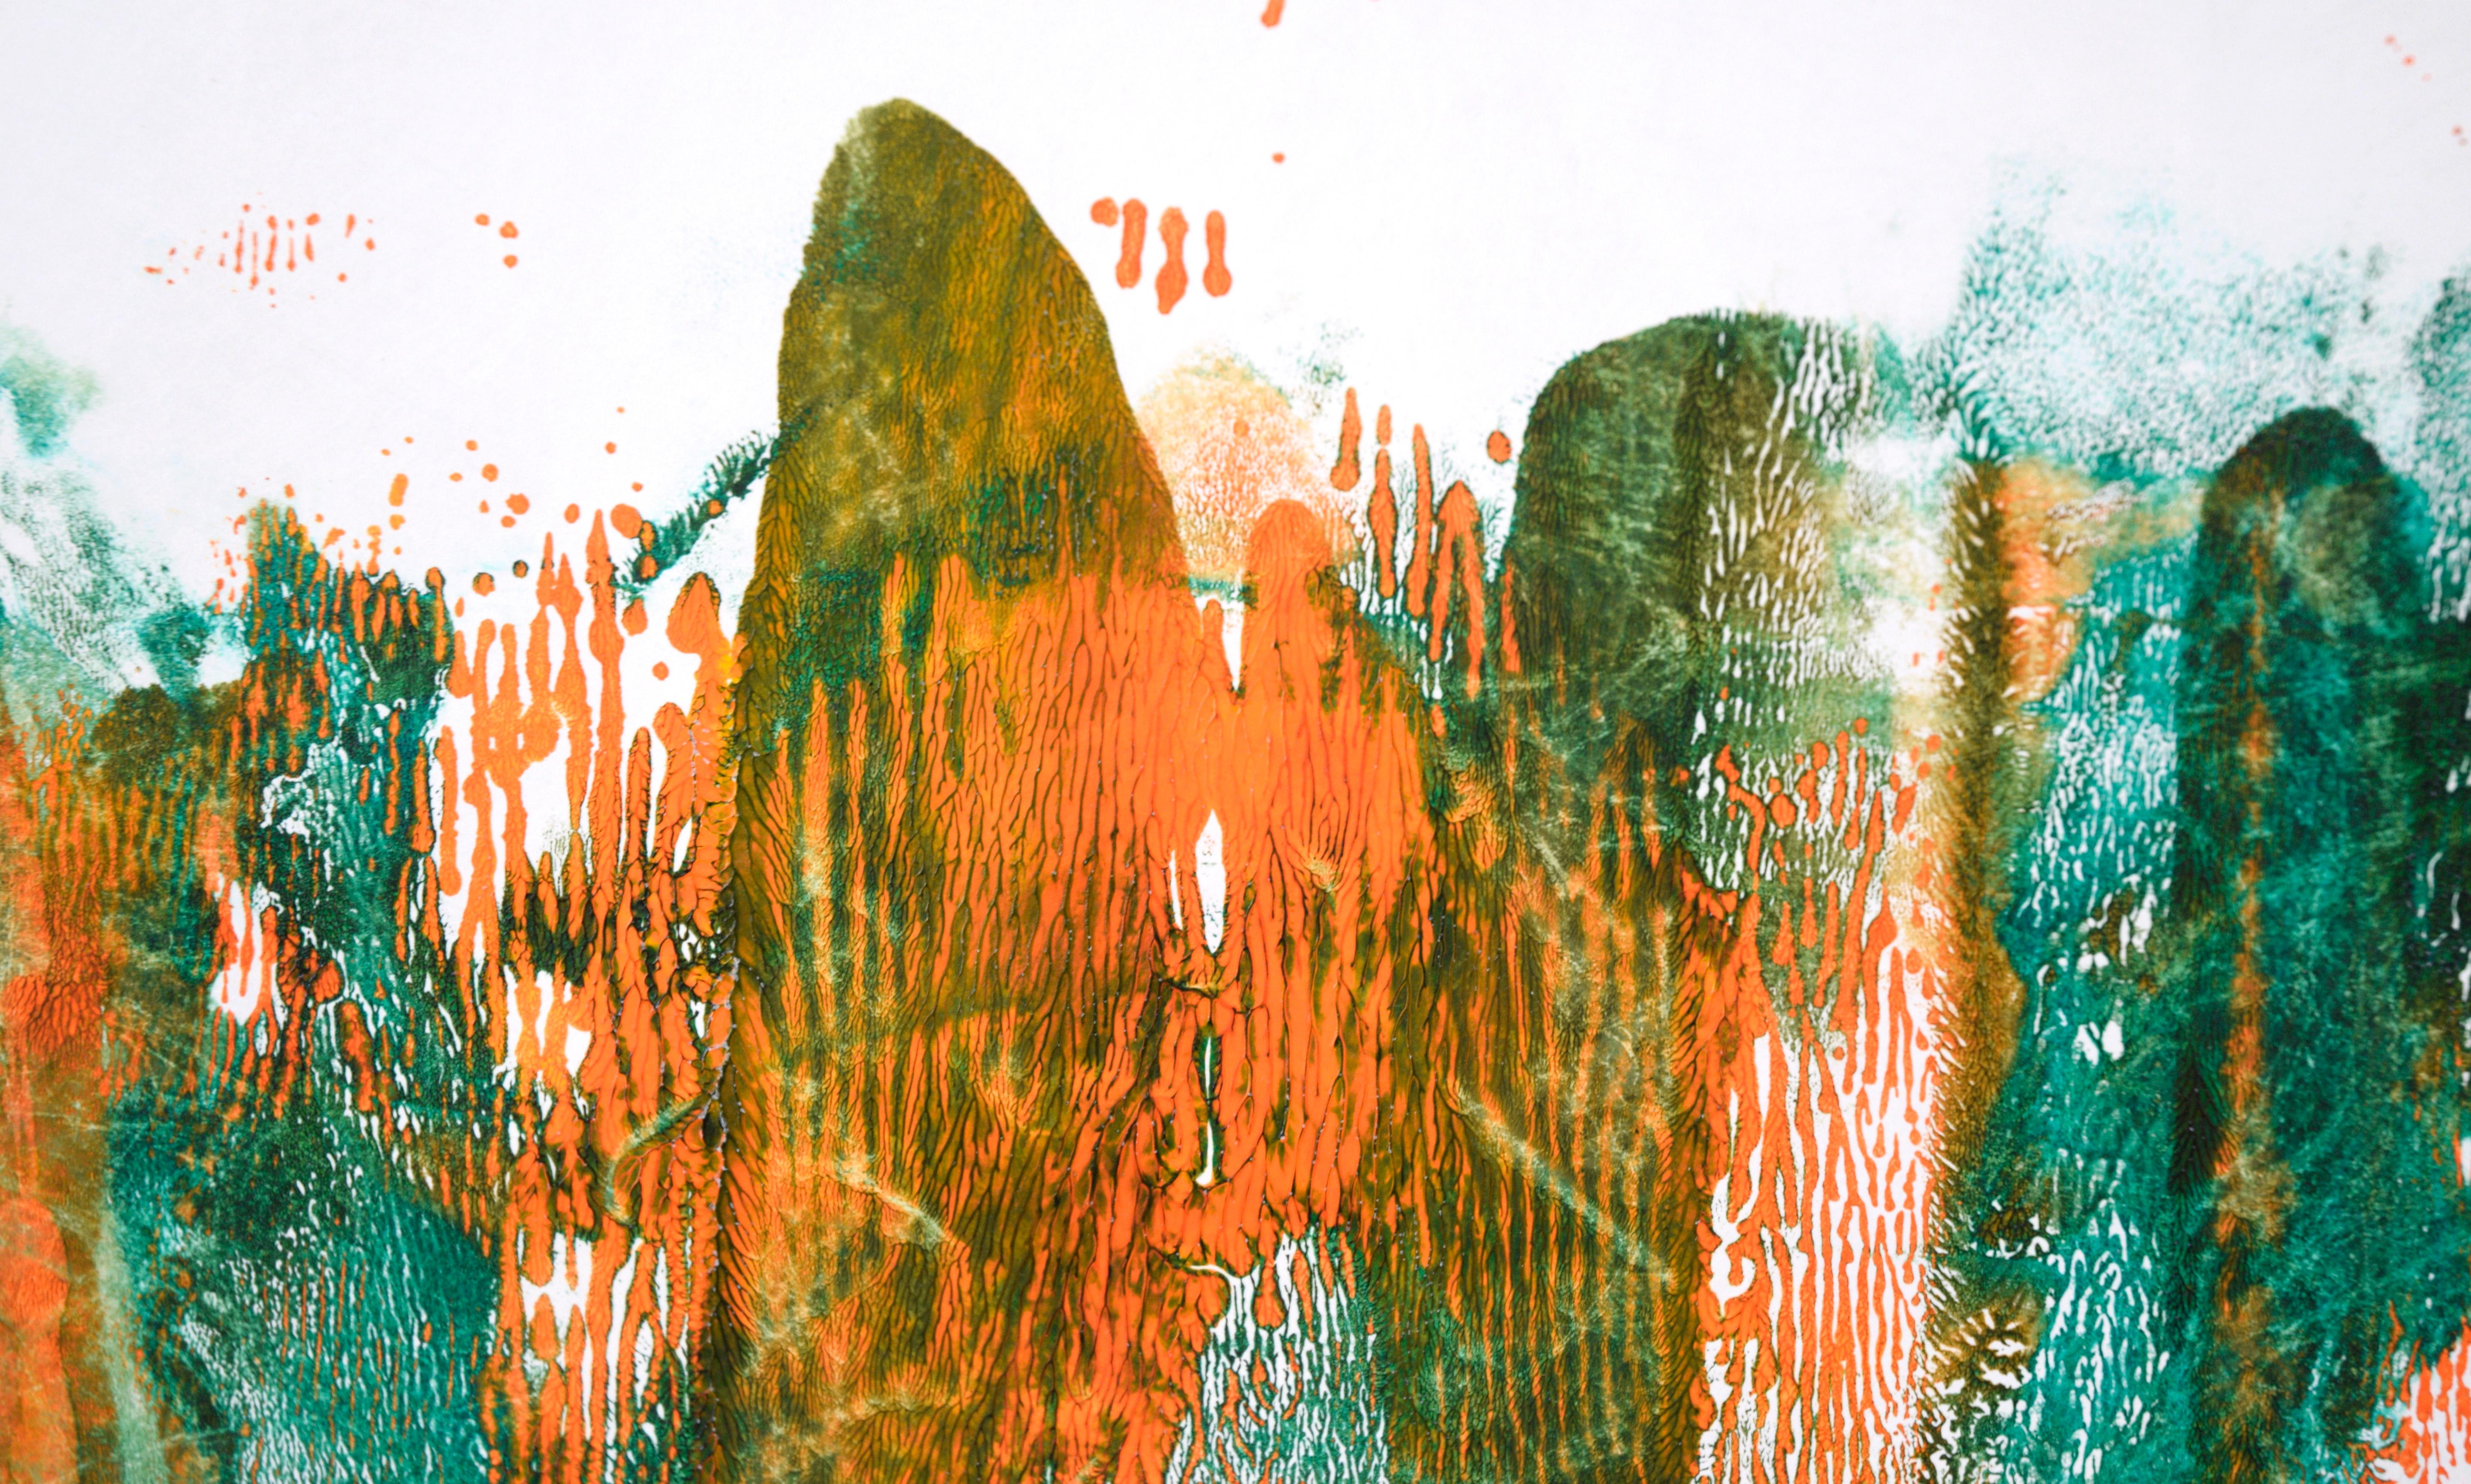 Green and Orange Abstract Composition in Acrylic on Paper - Abstract Expressionist Painting by Ricardo de Silva